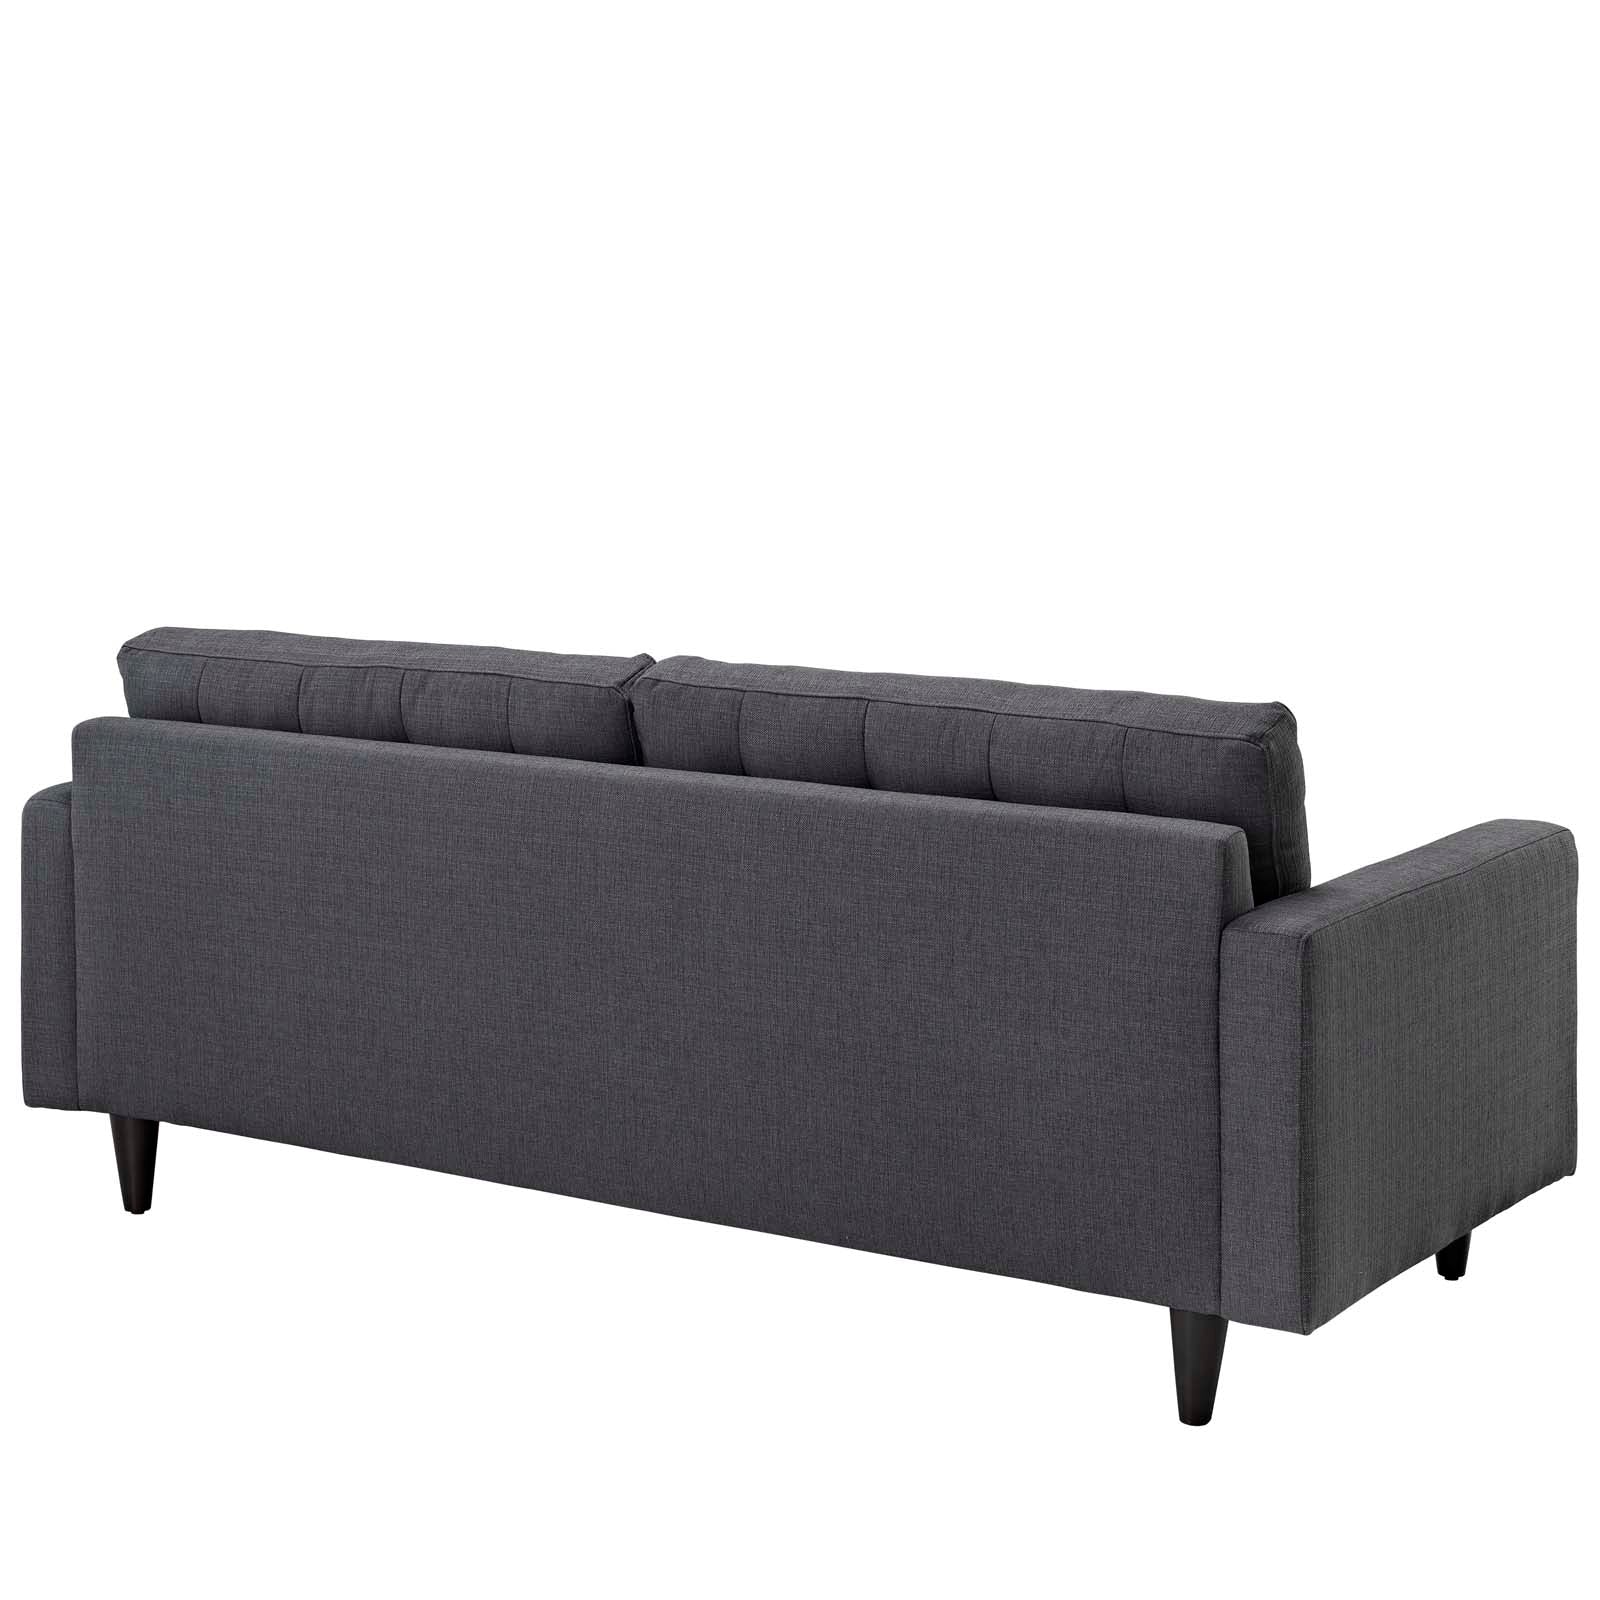 Modway Living Room Sets - Empress Sofa, Loveseat And Armchair Set Of 3 Gray